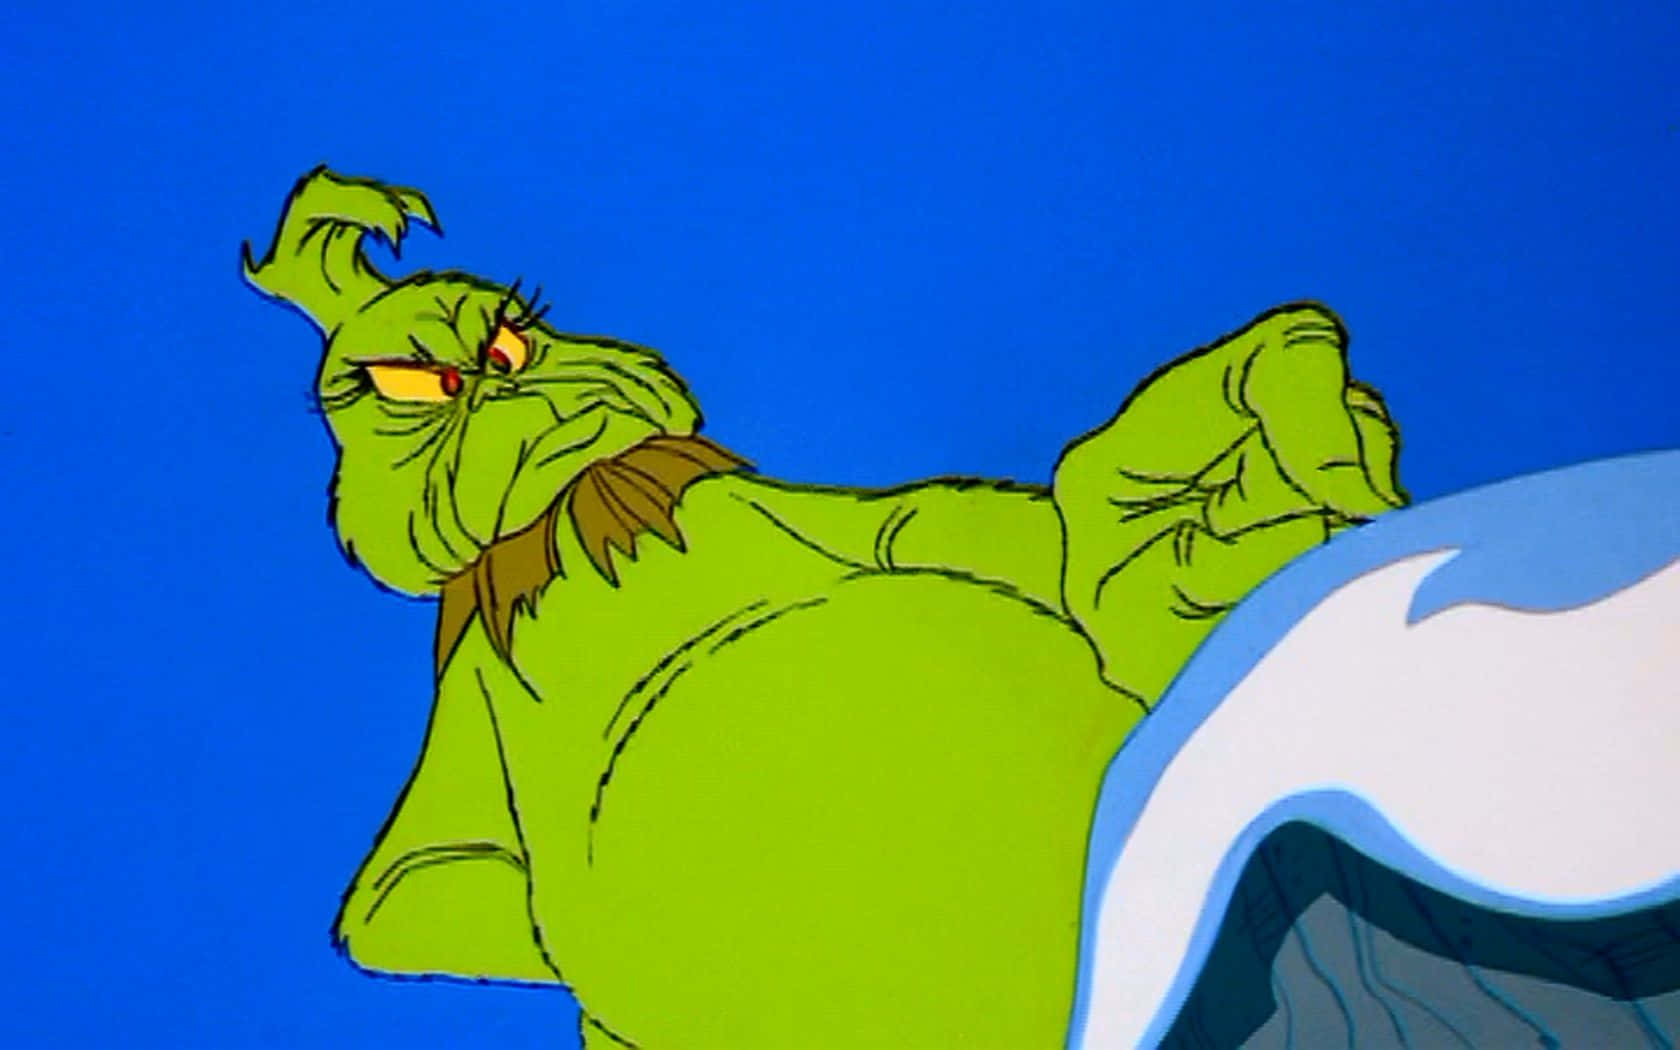 Spread The Christmas Joy Even If It's From The Heart Of The Grinch Wallpaper